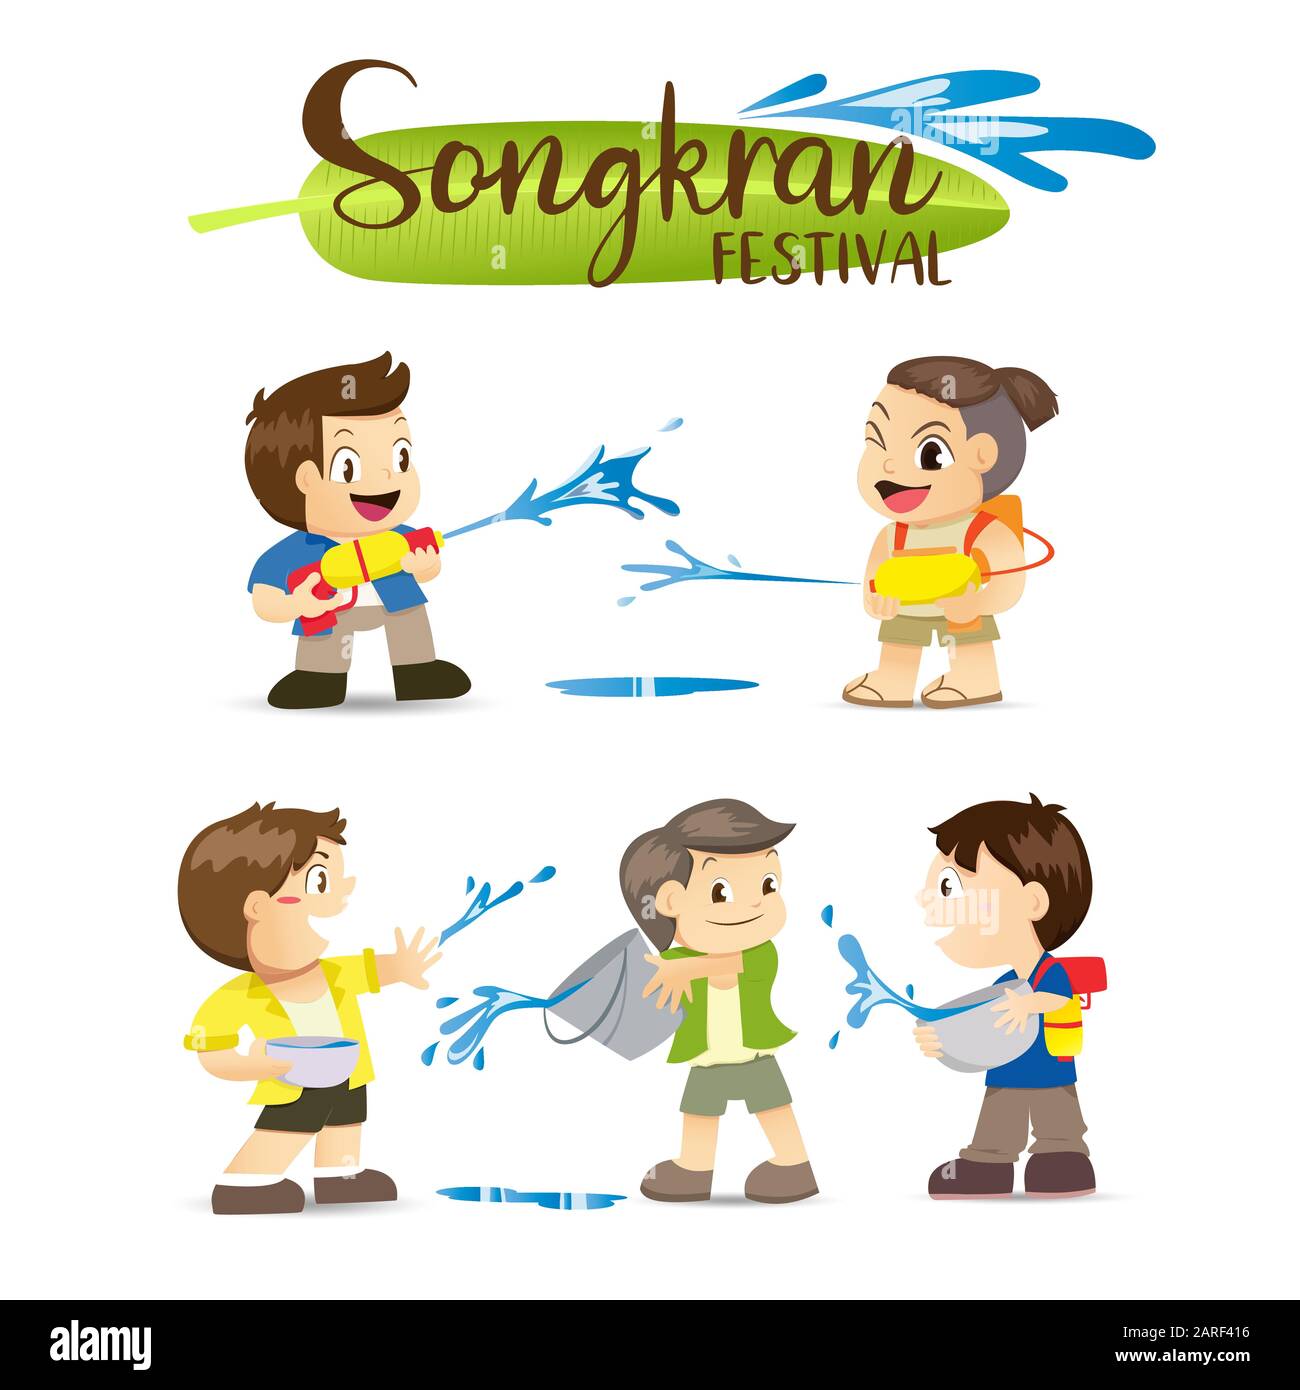 Songkran Festival, Thai New Year's national holiday, People spray water from water pistols and buckets. Stock Vector